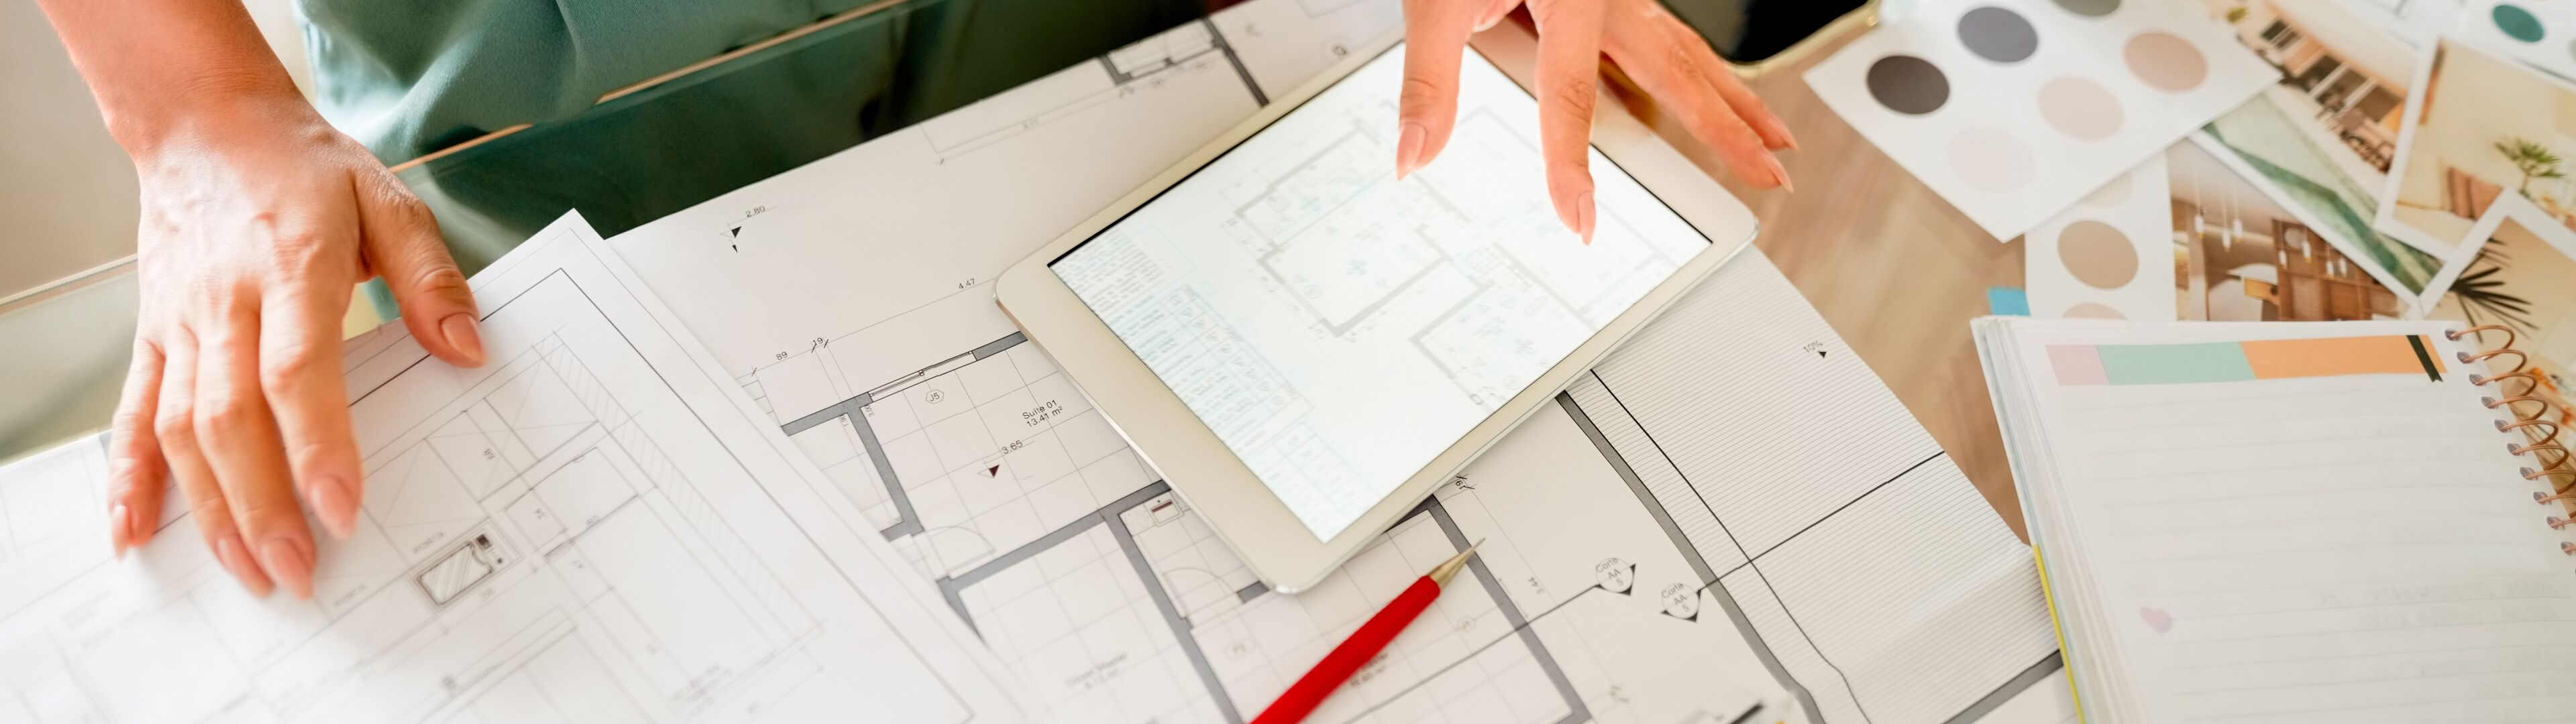 A professional reviewing architectural plans on a tablet over a desk cluttered with design drawings and color palettes.